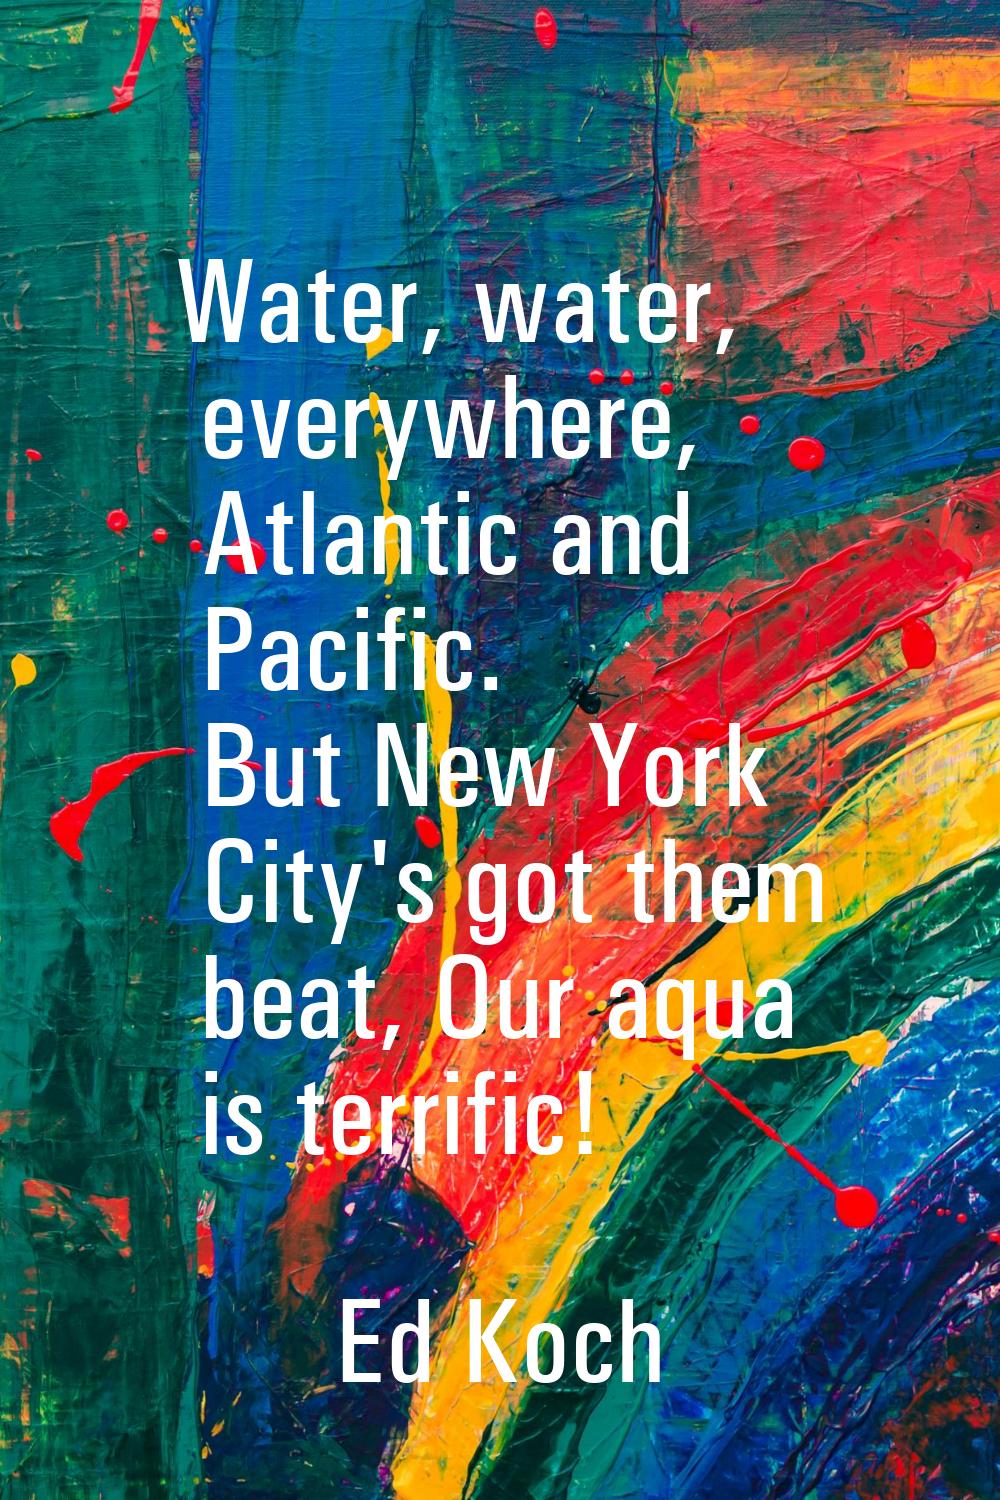 Water, water, everywhere, Atlantic and Pacific. But New York City's got them beat, Our aqua is terr